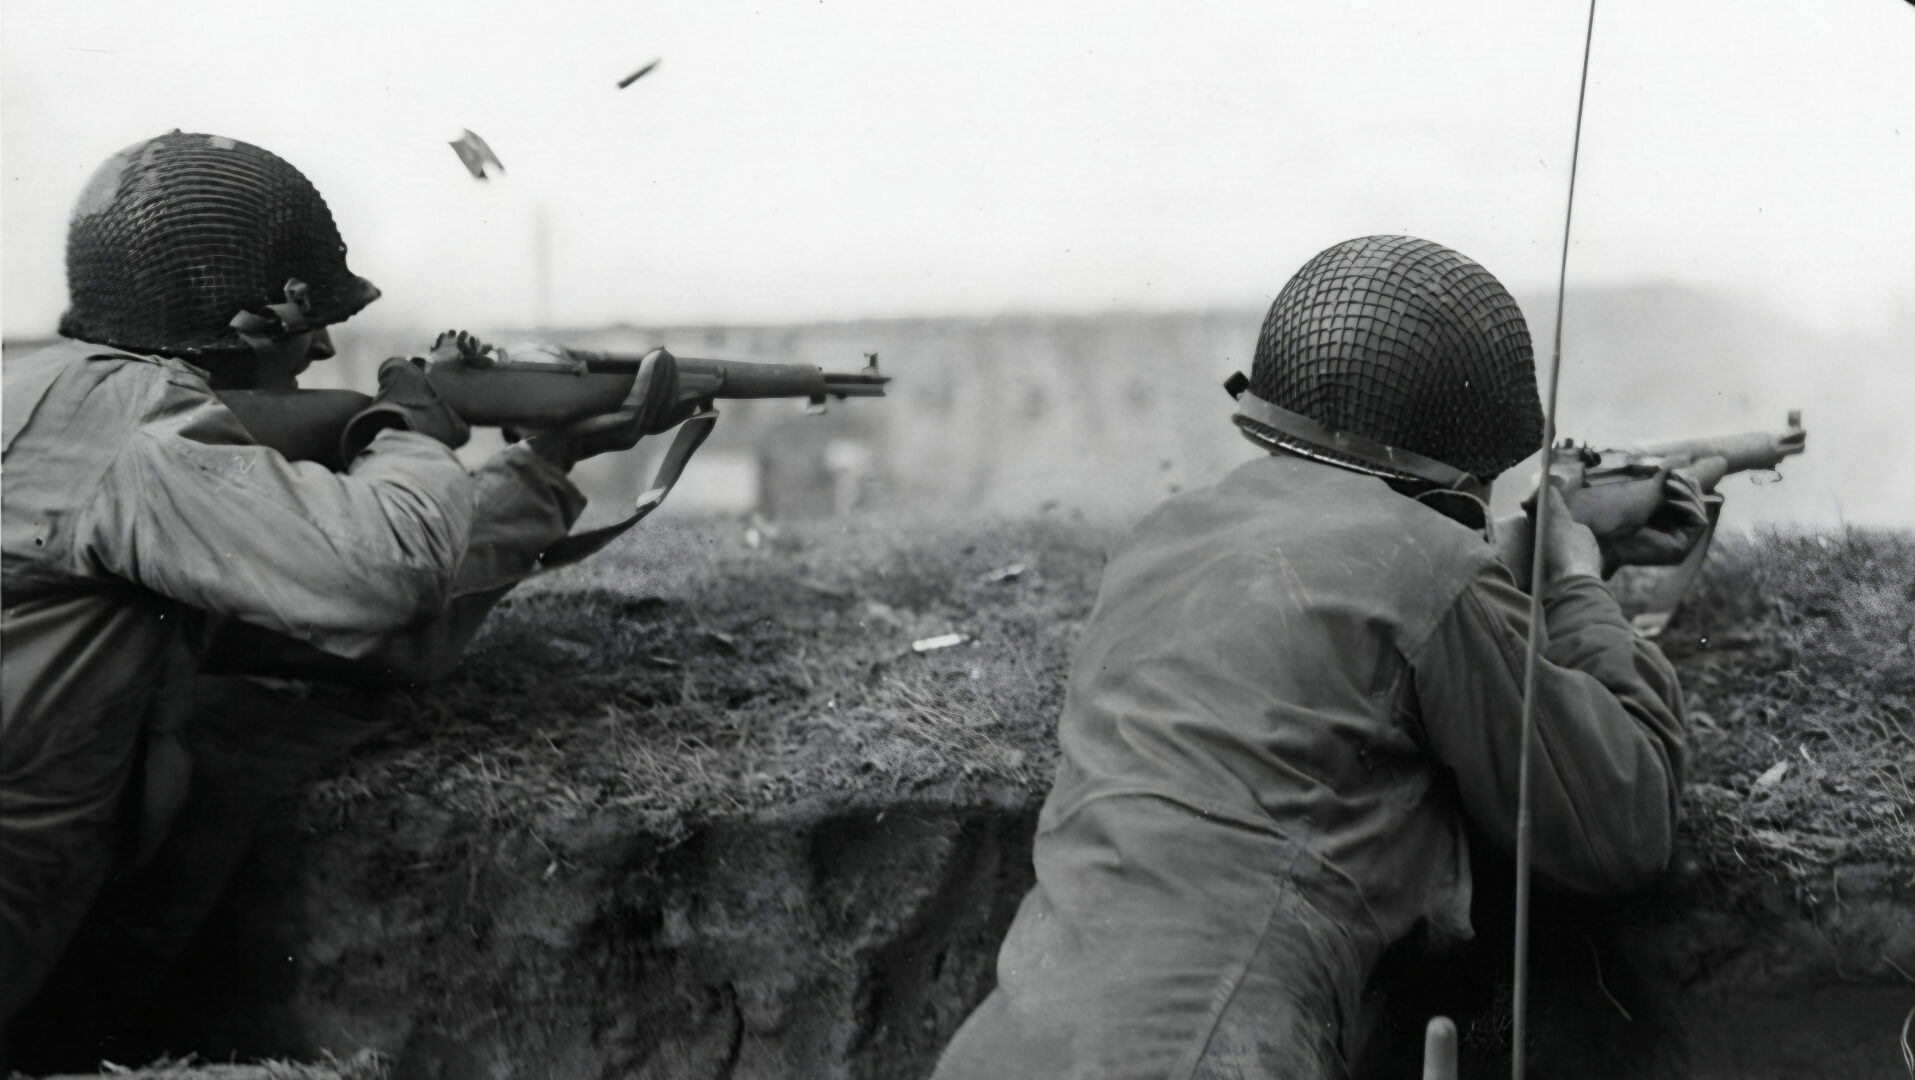 Taking advantage of the minimal cover afforded by their foxhole, a pair of American soldiers provides suppressing fire in an effort to dislodge a German sniper